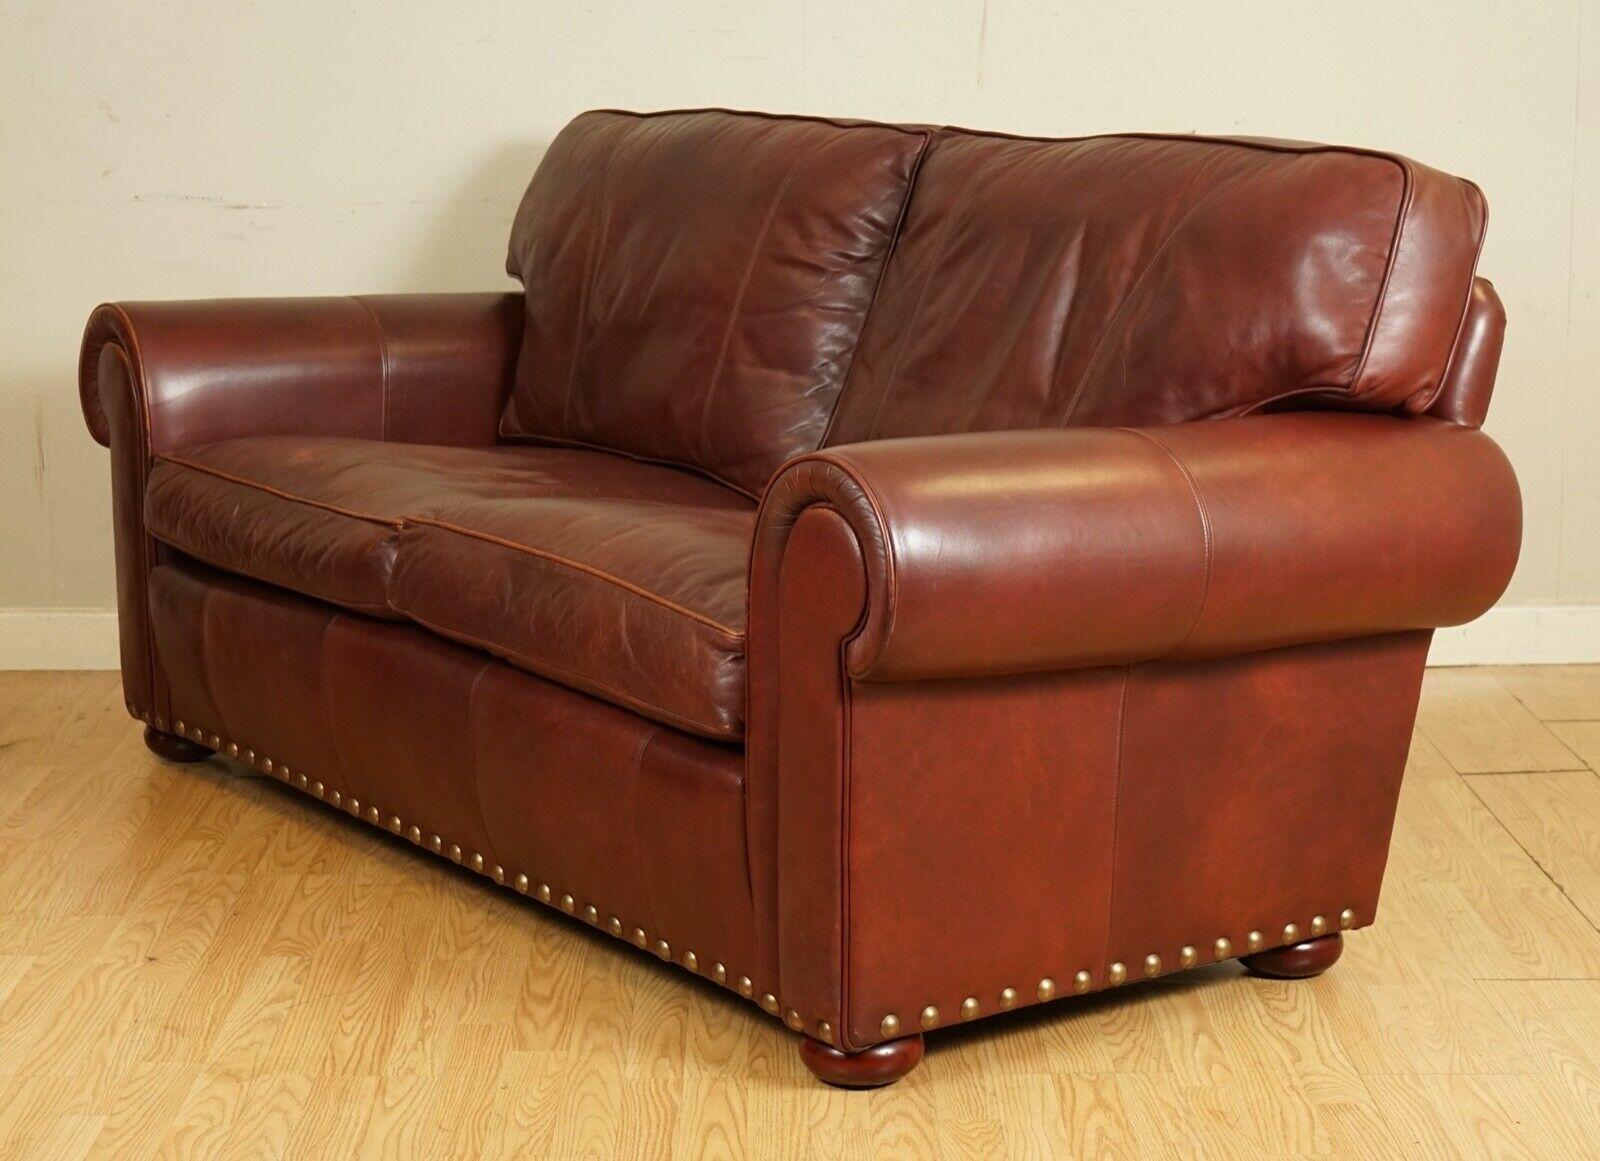 Stunning Wade Upholstery Redish Brown Two Seater Sofa, Grand Sofa Available 2